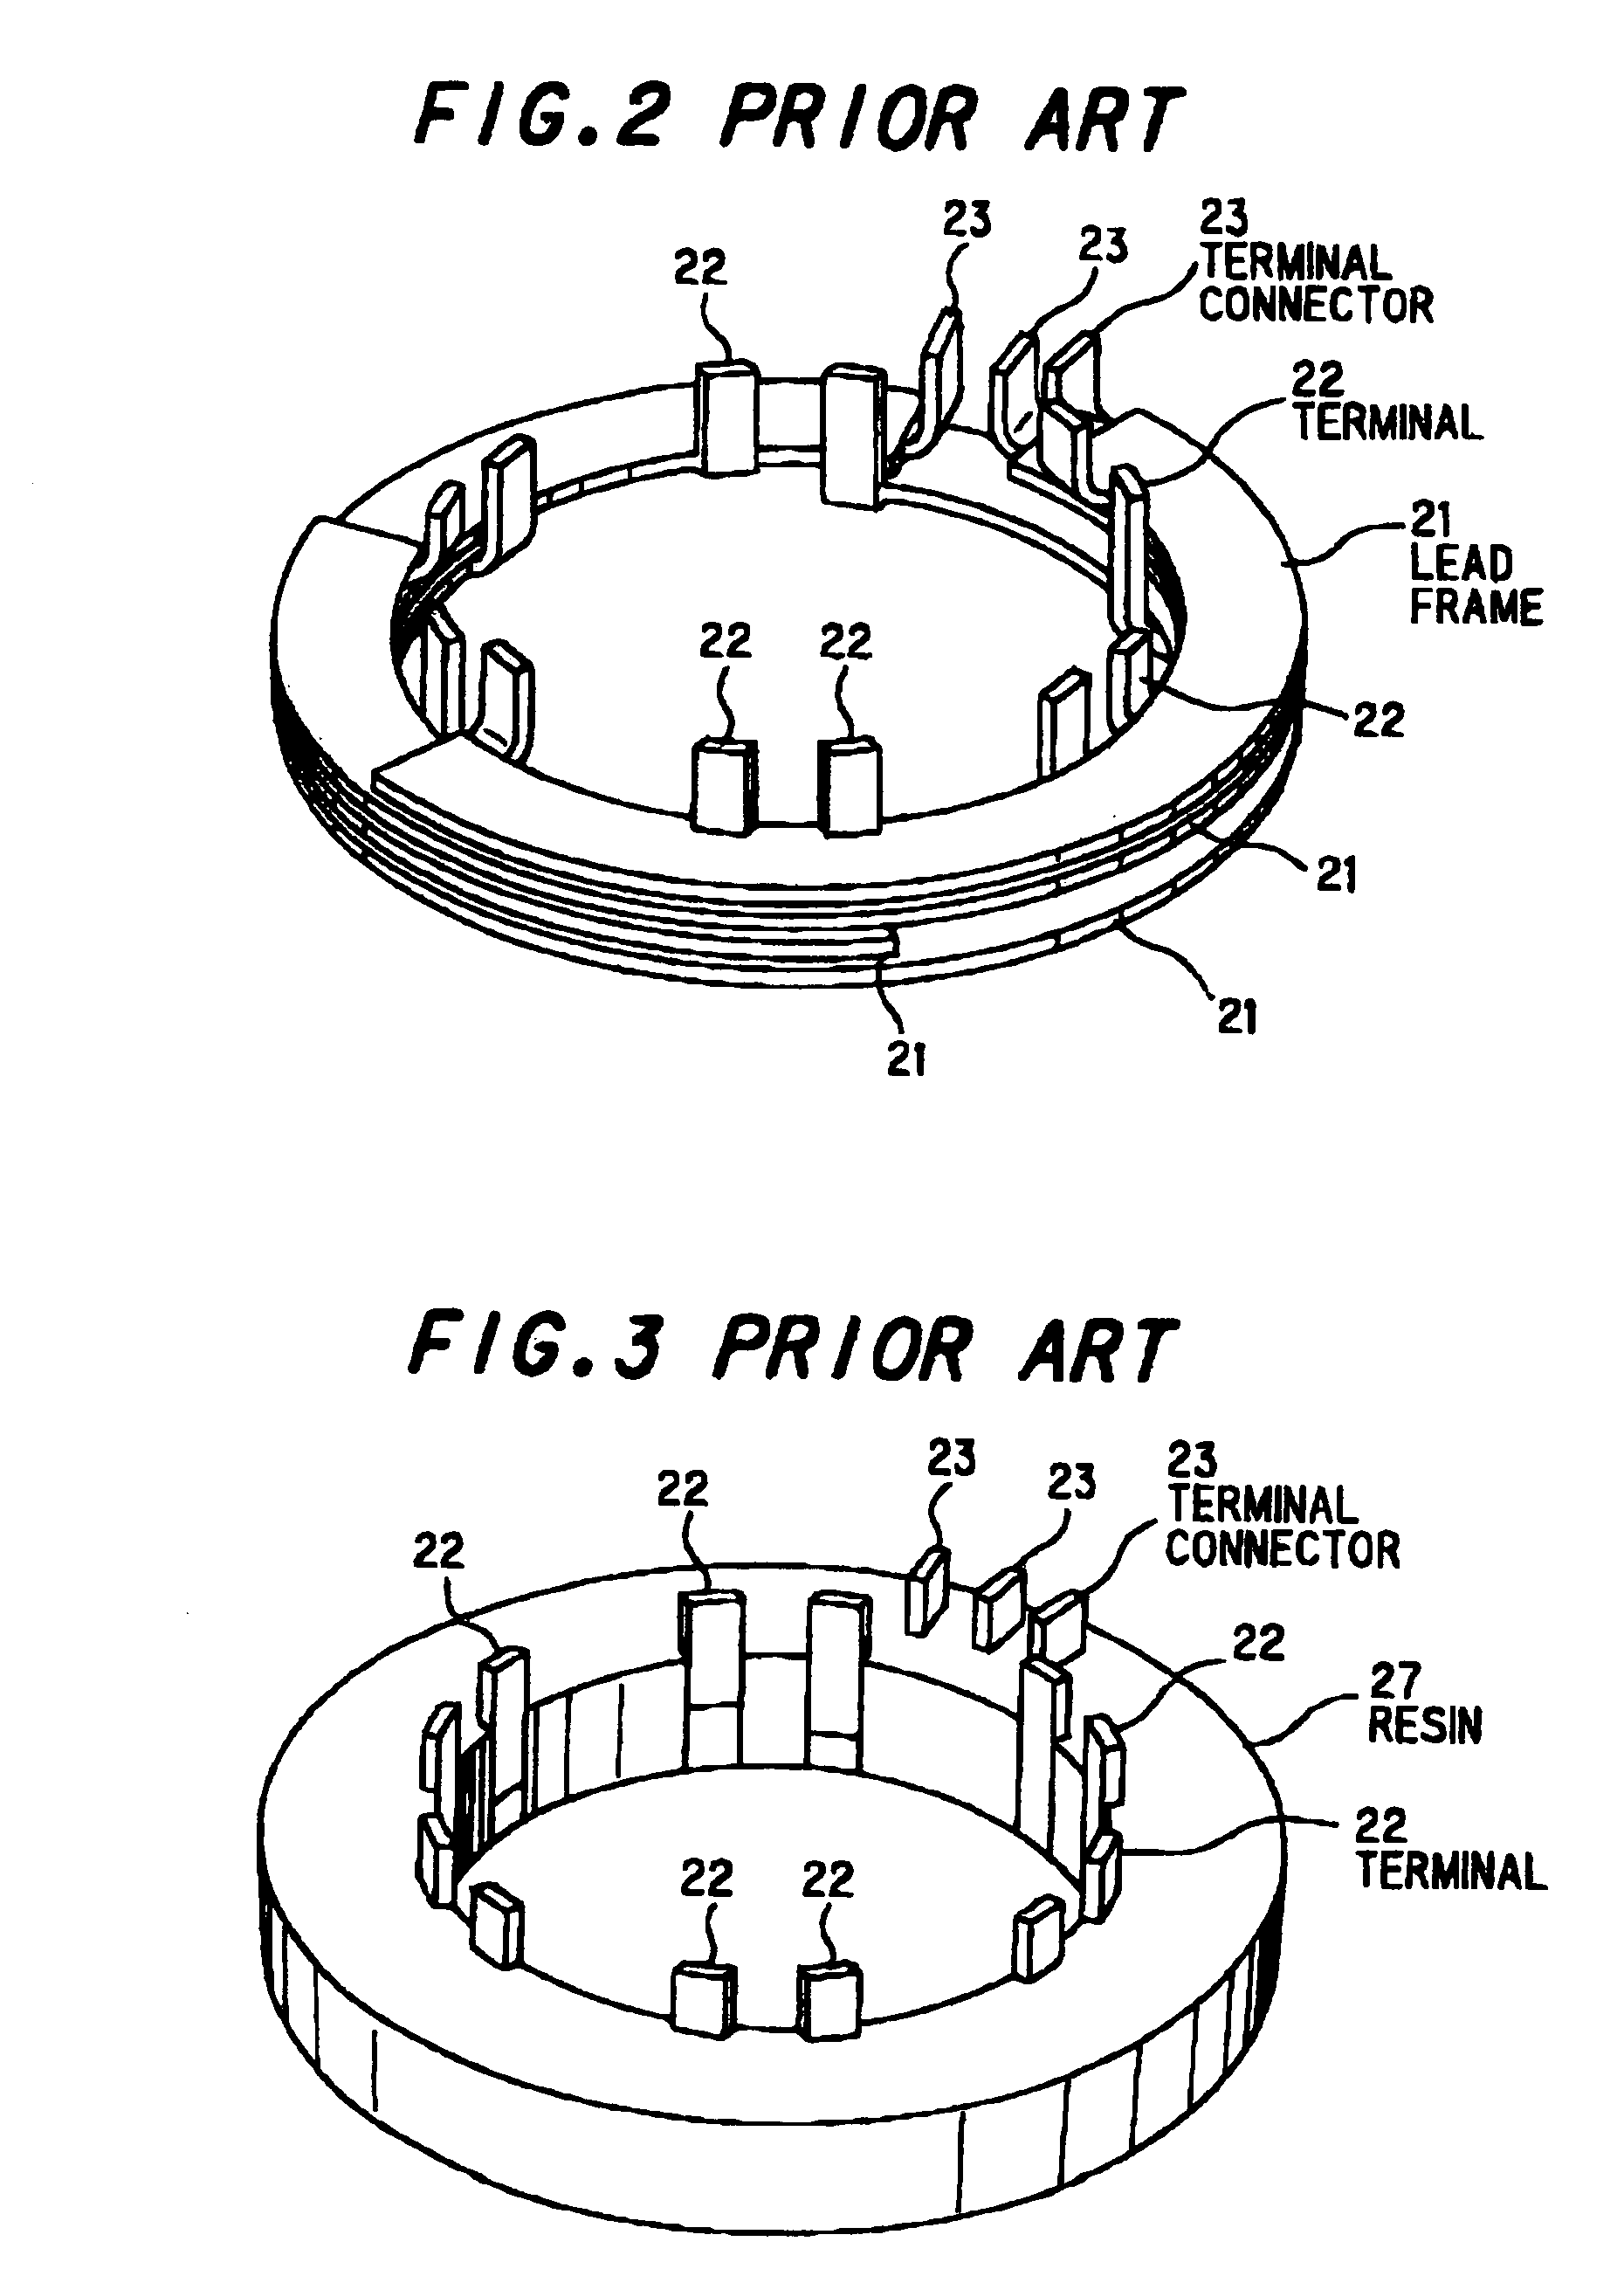 Interconnection assembly for an electric motor and method of making the same